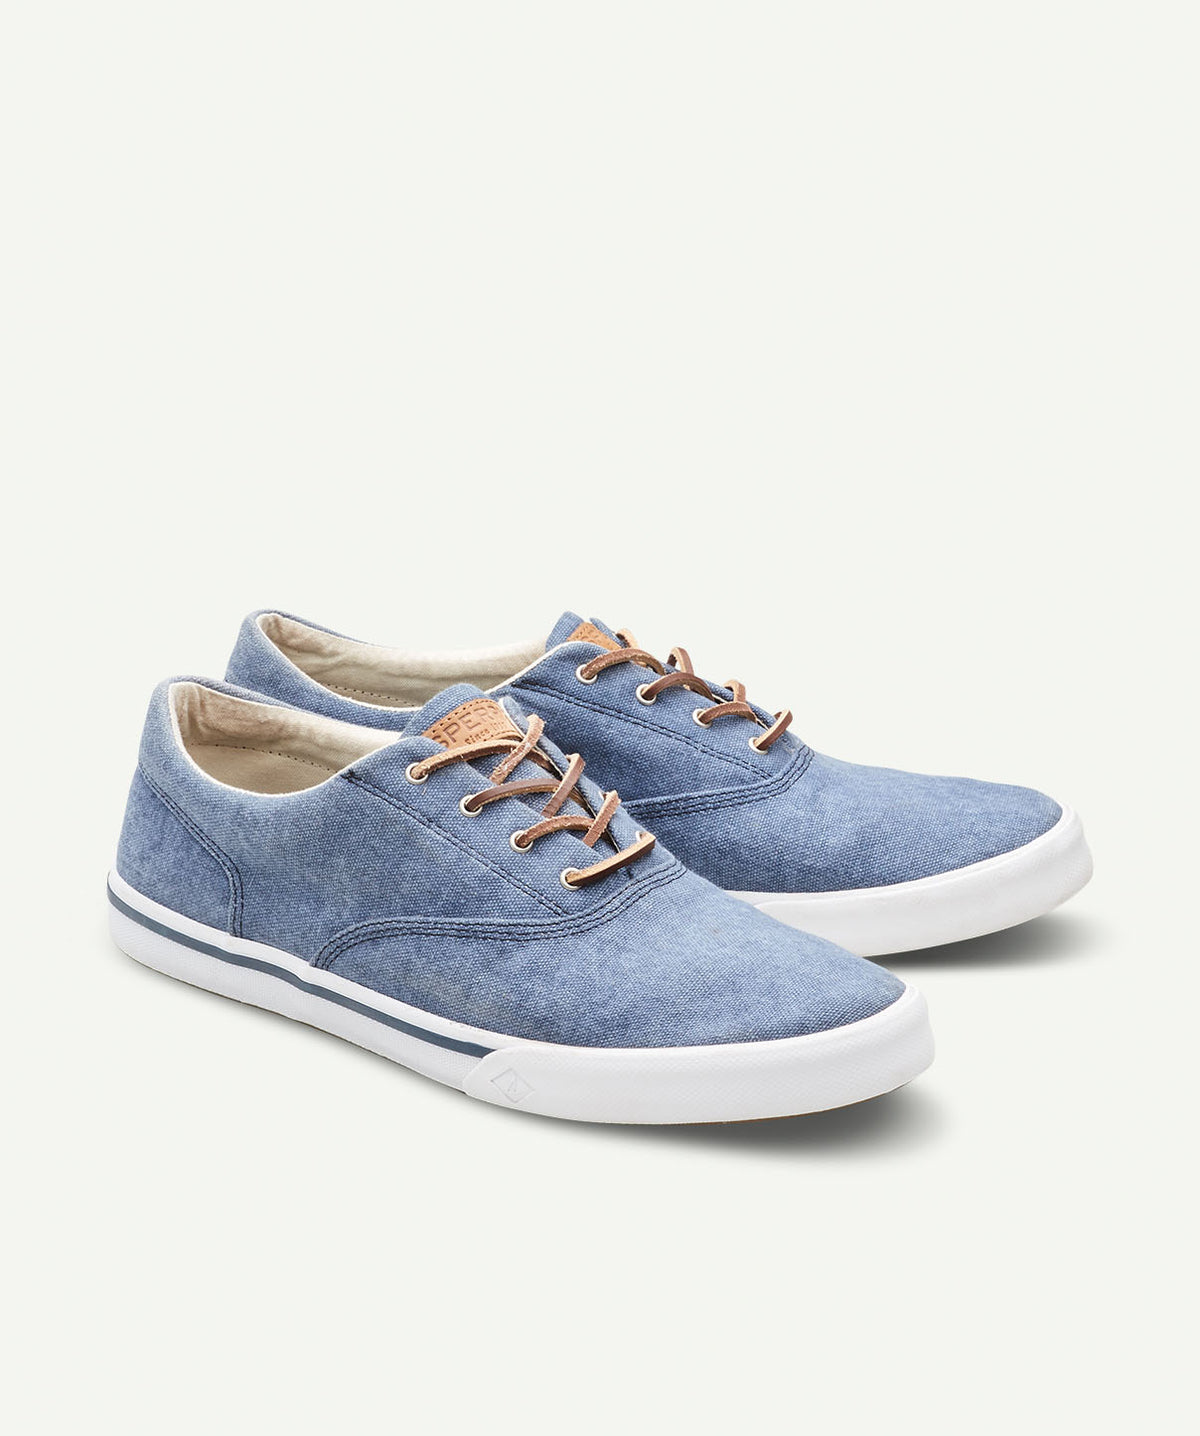 Sperry Canvas Sneakers - Navy | Shoes 